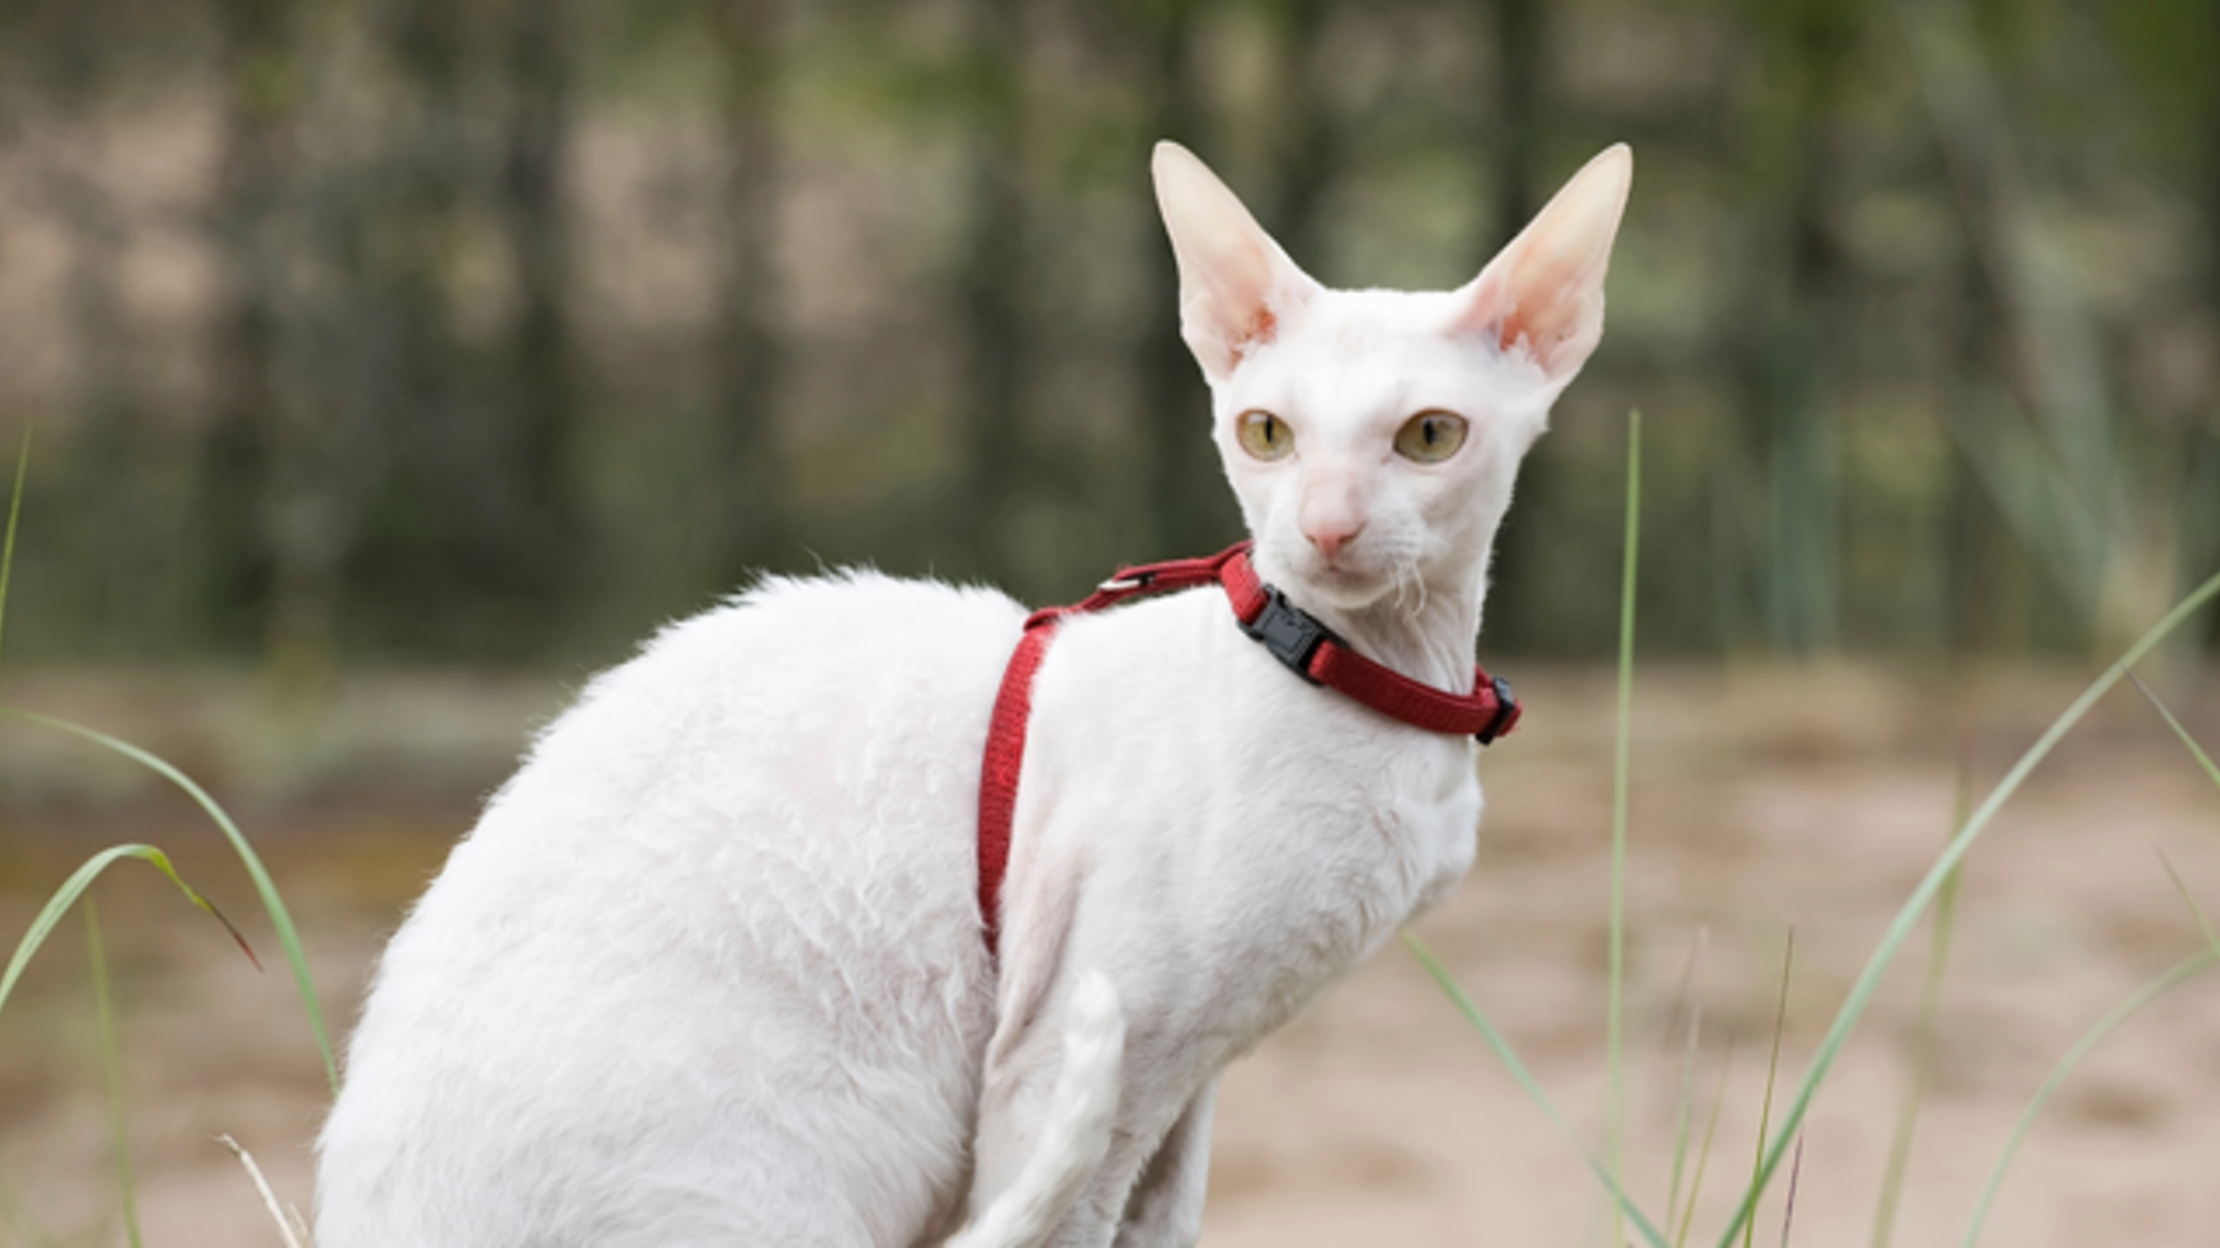 8 Curly Facts About Cornish Rex Cats | Mental Floss